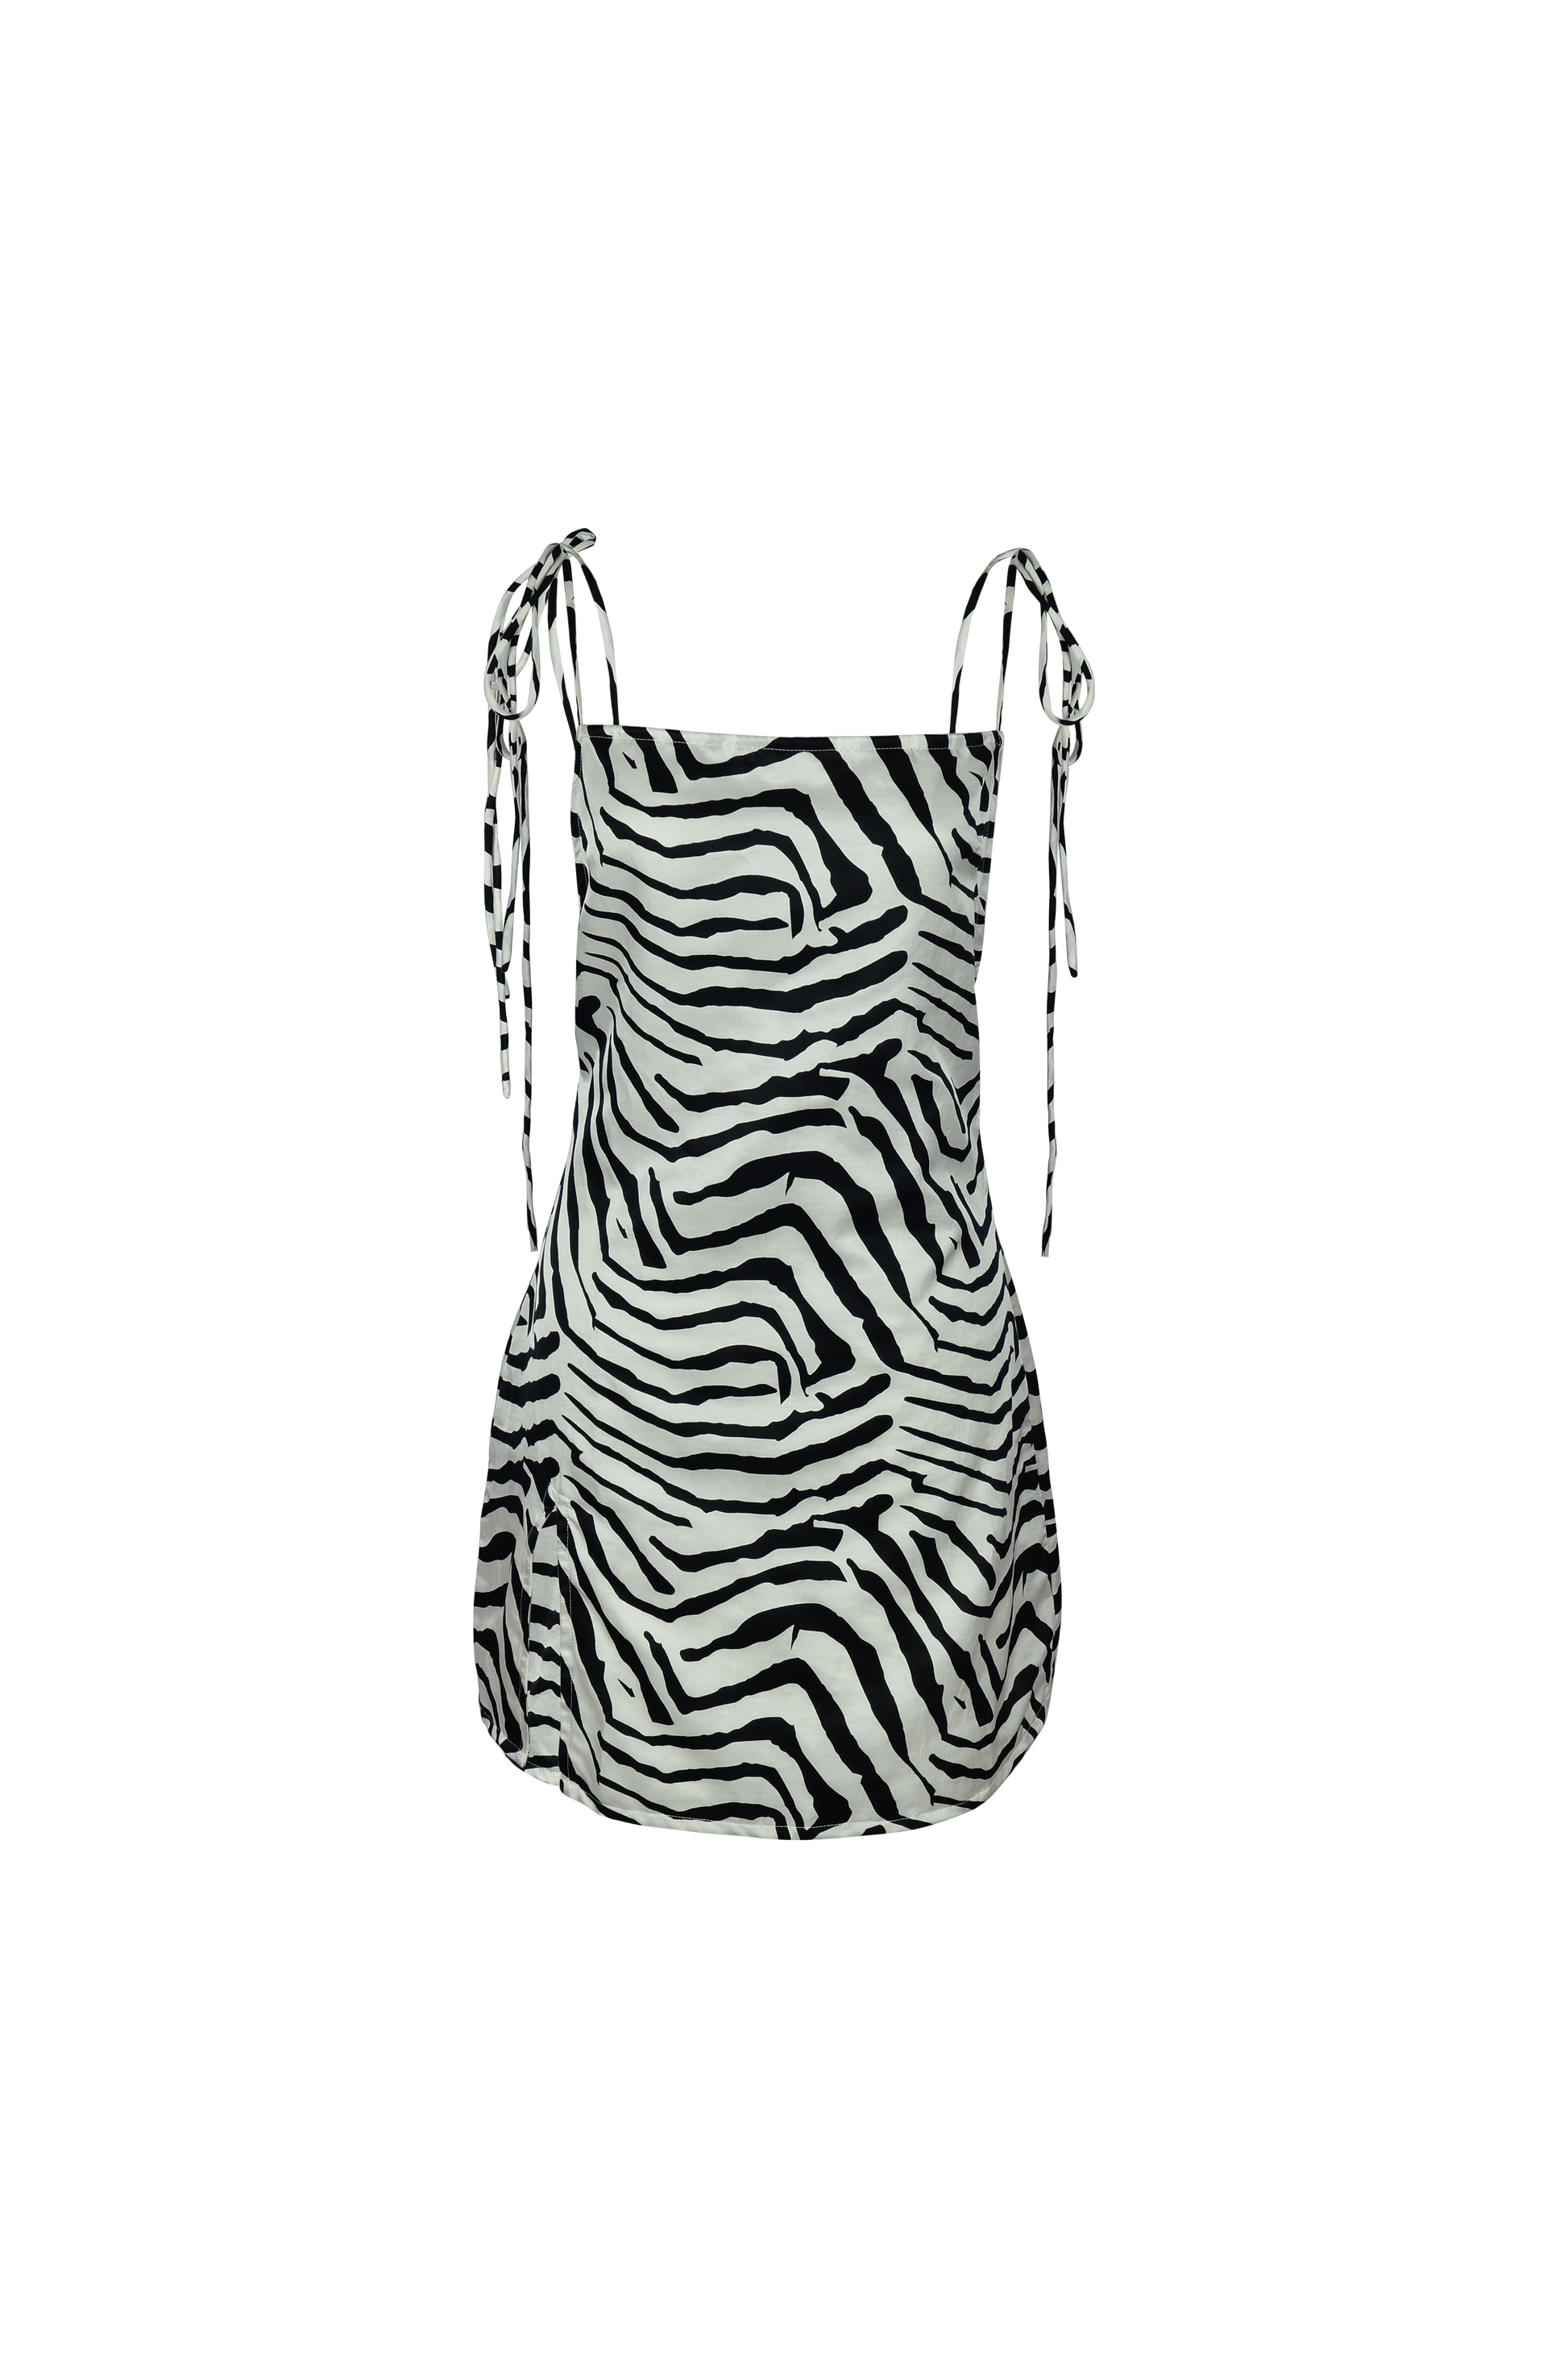 Repose Dress Tiger Print - Dress THIS IS A LOVE SONG